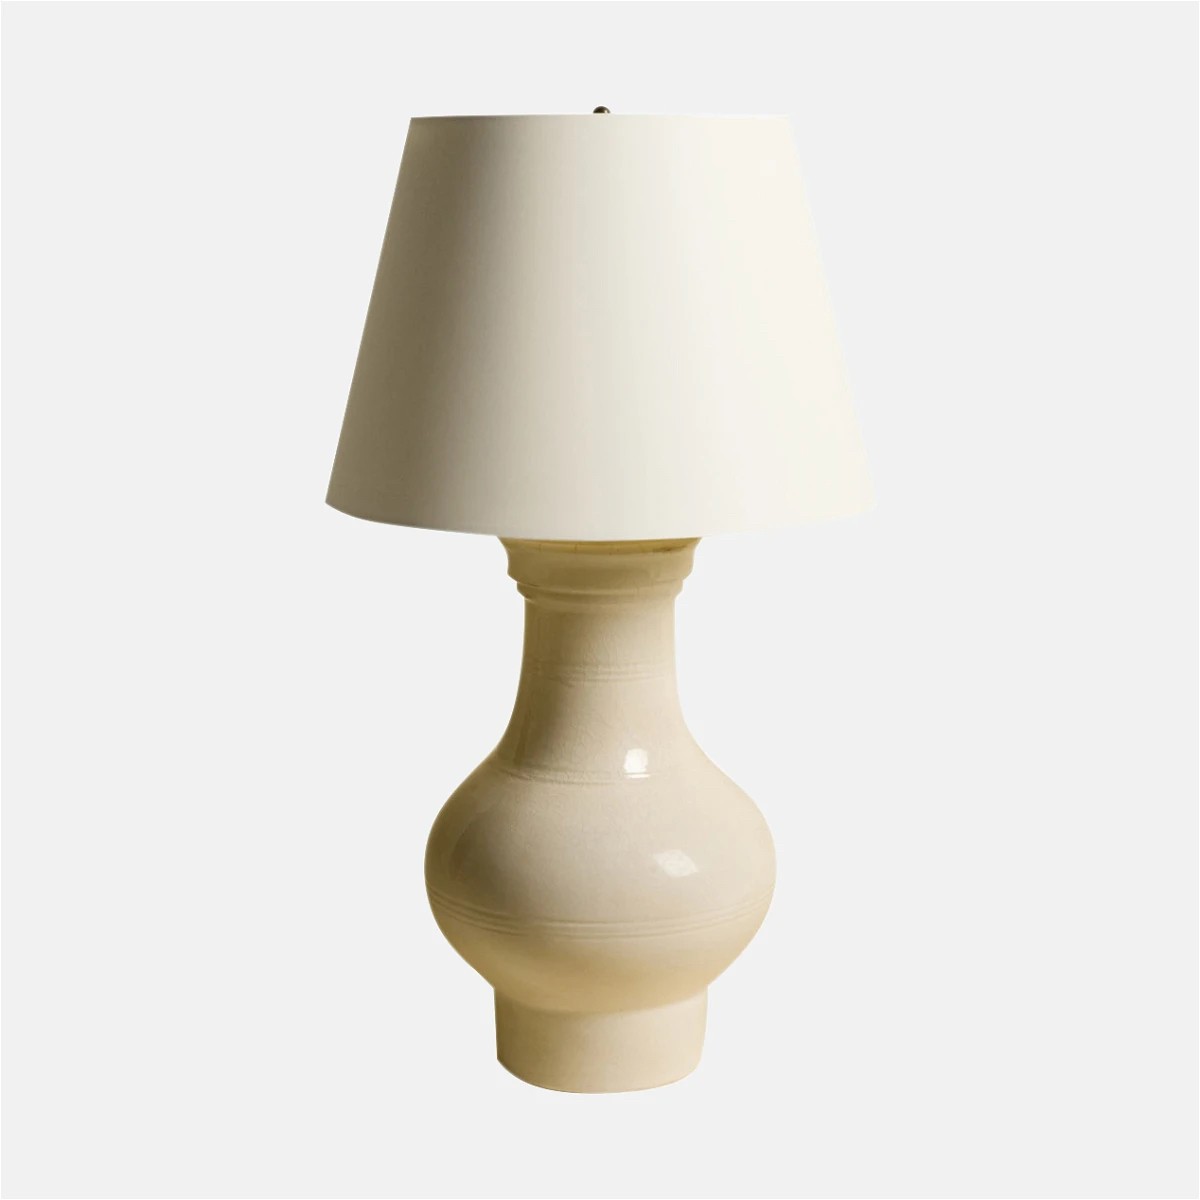 The image of an Chinese Ceramic Jar Lamp product